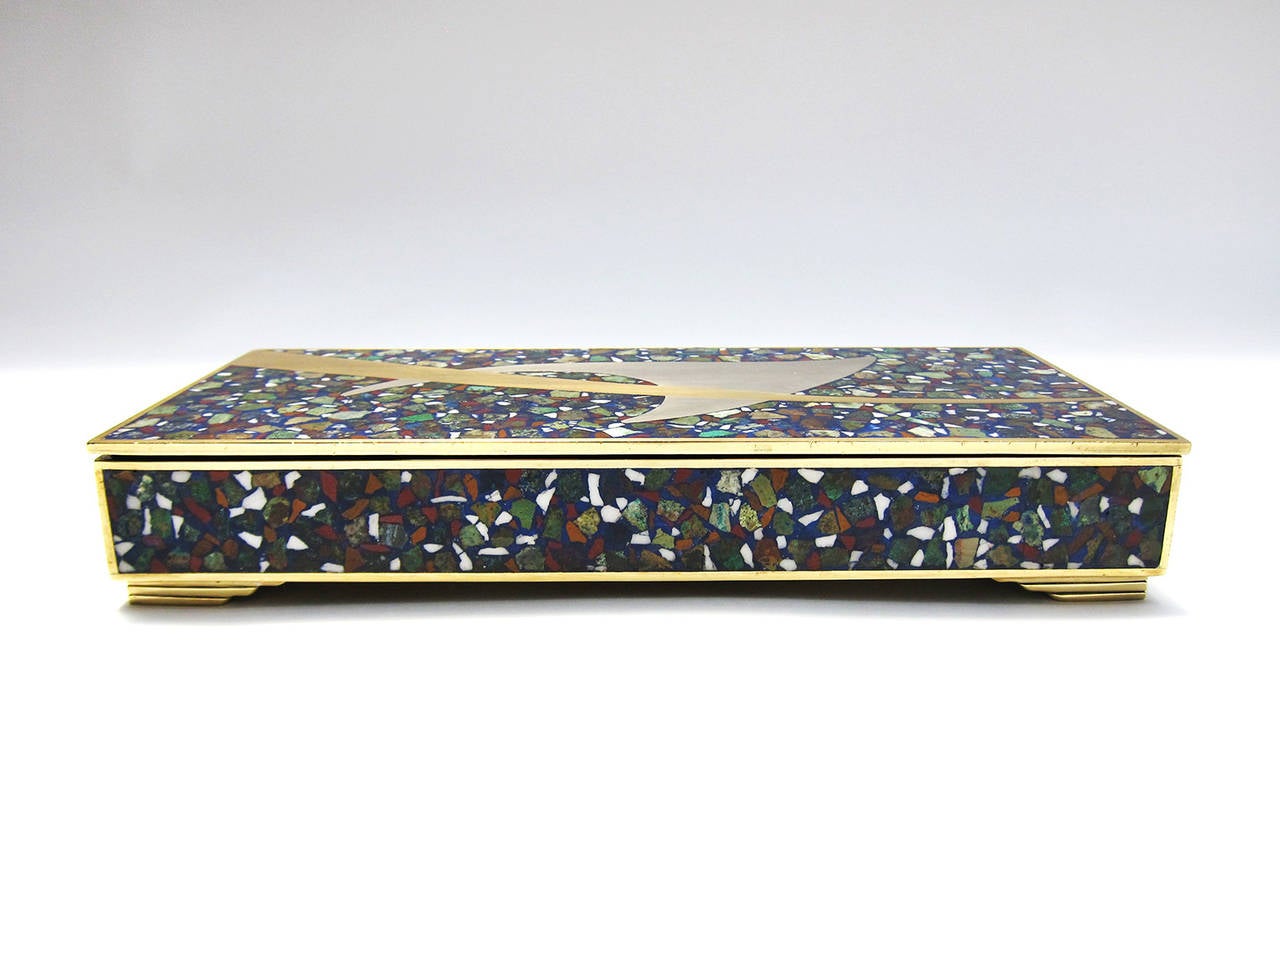 This unusual and elegant jewel box has a frame of brass with stone ‘confetti’ of crizacola, jasper y azur-malachite which are inlaid into a base of stone ‘dust’, possibly blue agate or lapisazuli. Breaking this background is a flash of brass and